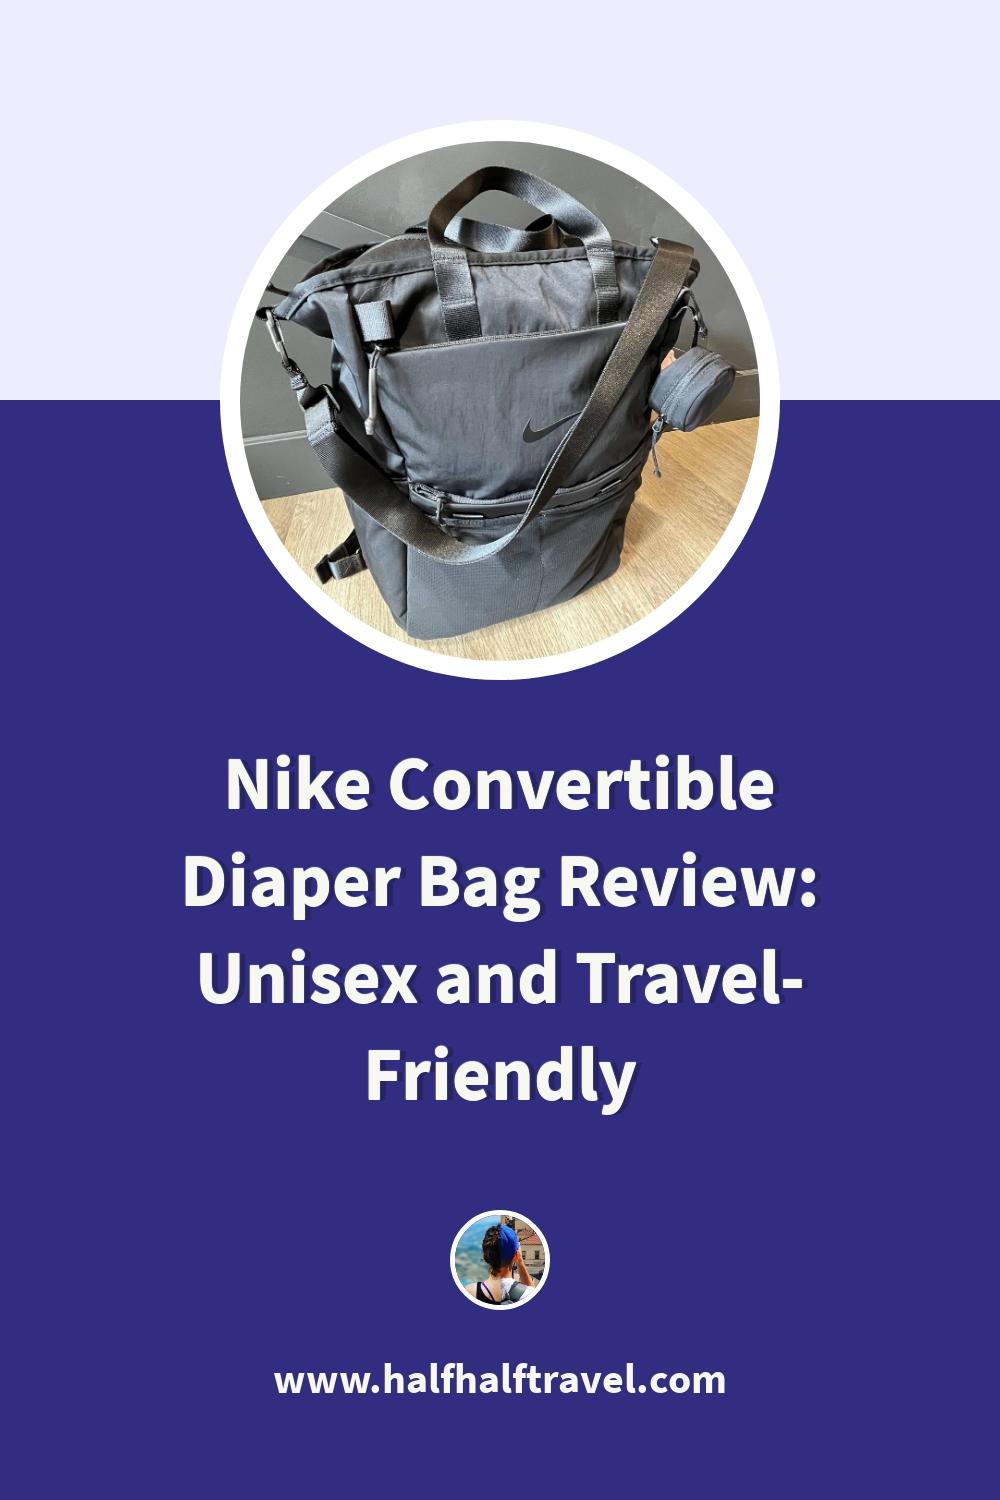 Pinterest image from the 'Nike Convertible Diaper Bag Review: Unisex and Travel-Friendly' article on Half Half Travel